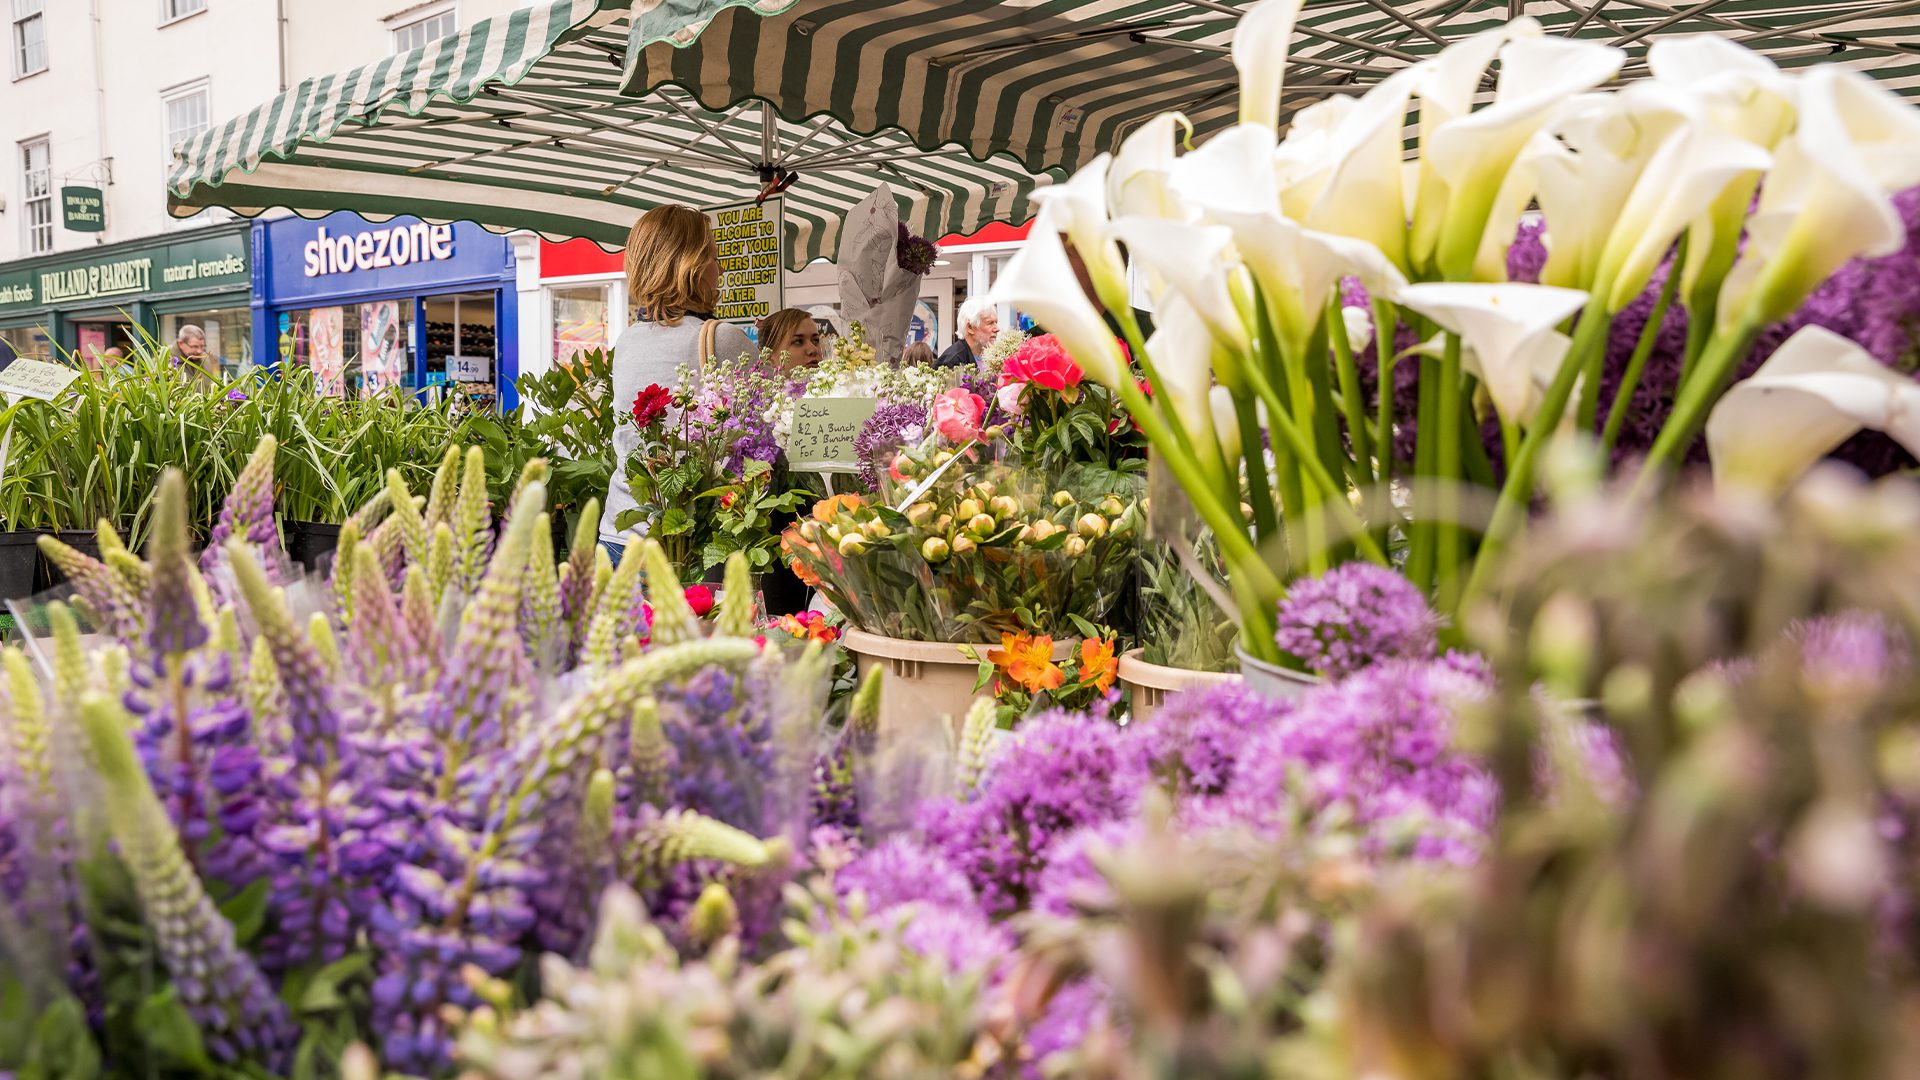 Close up photo of flowers on a stall